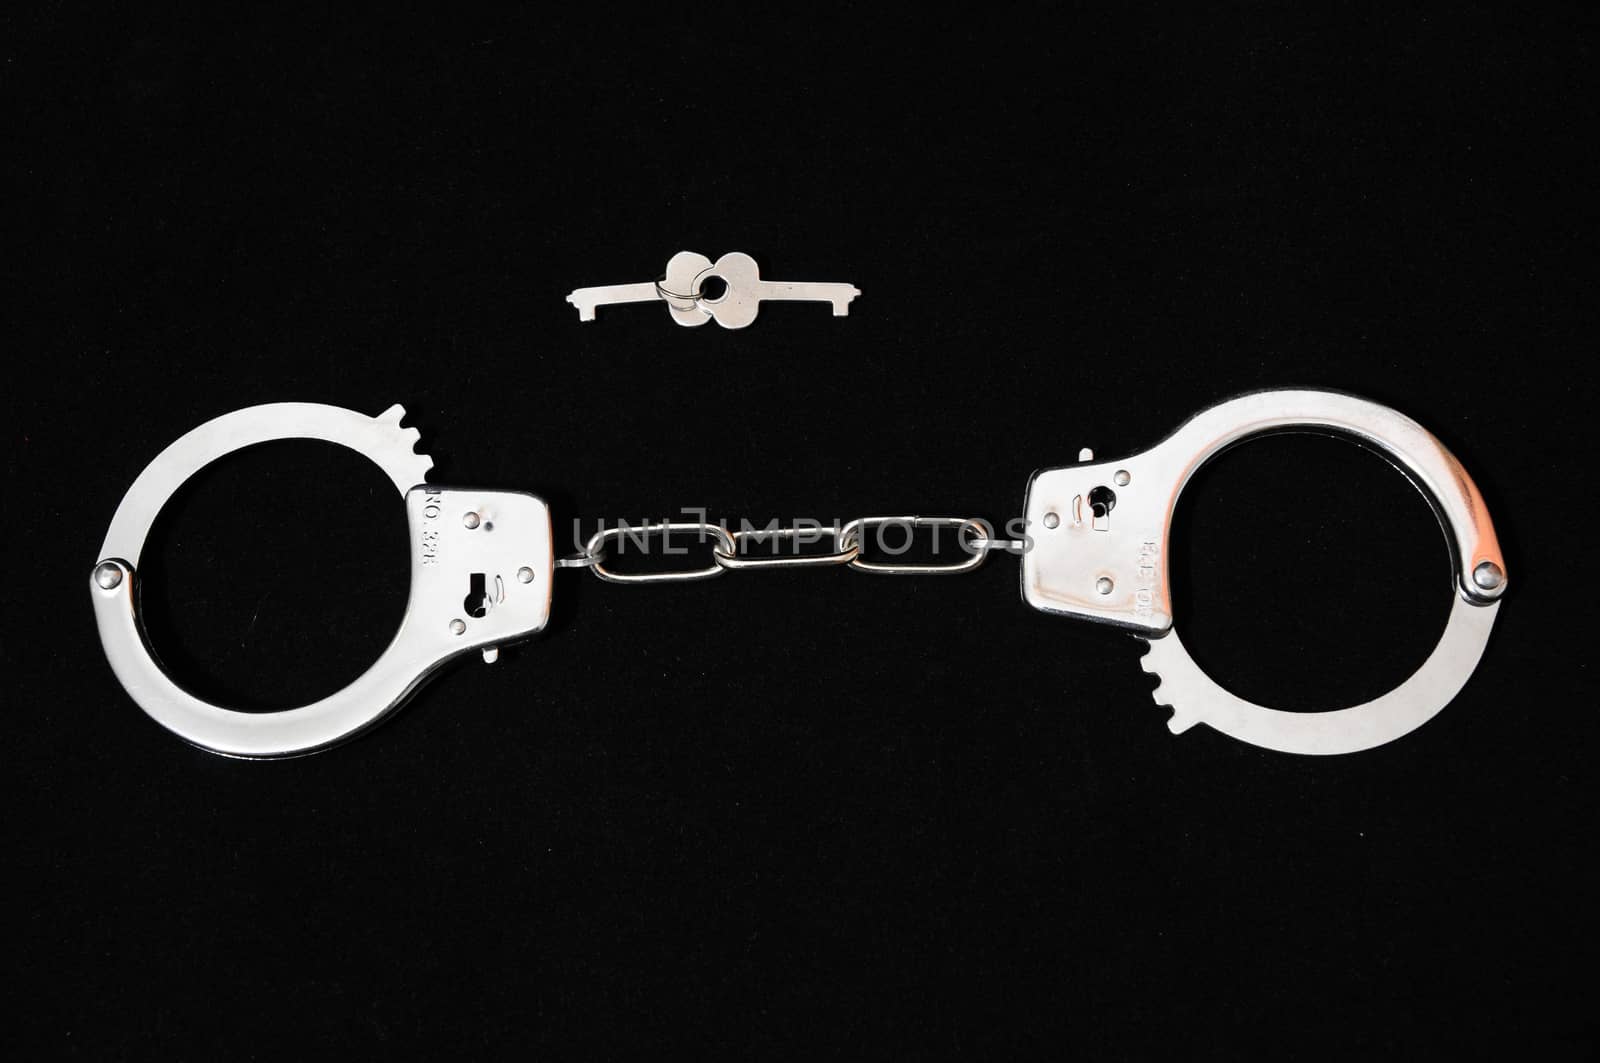 One Pair of Handcuffs on a Black Background